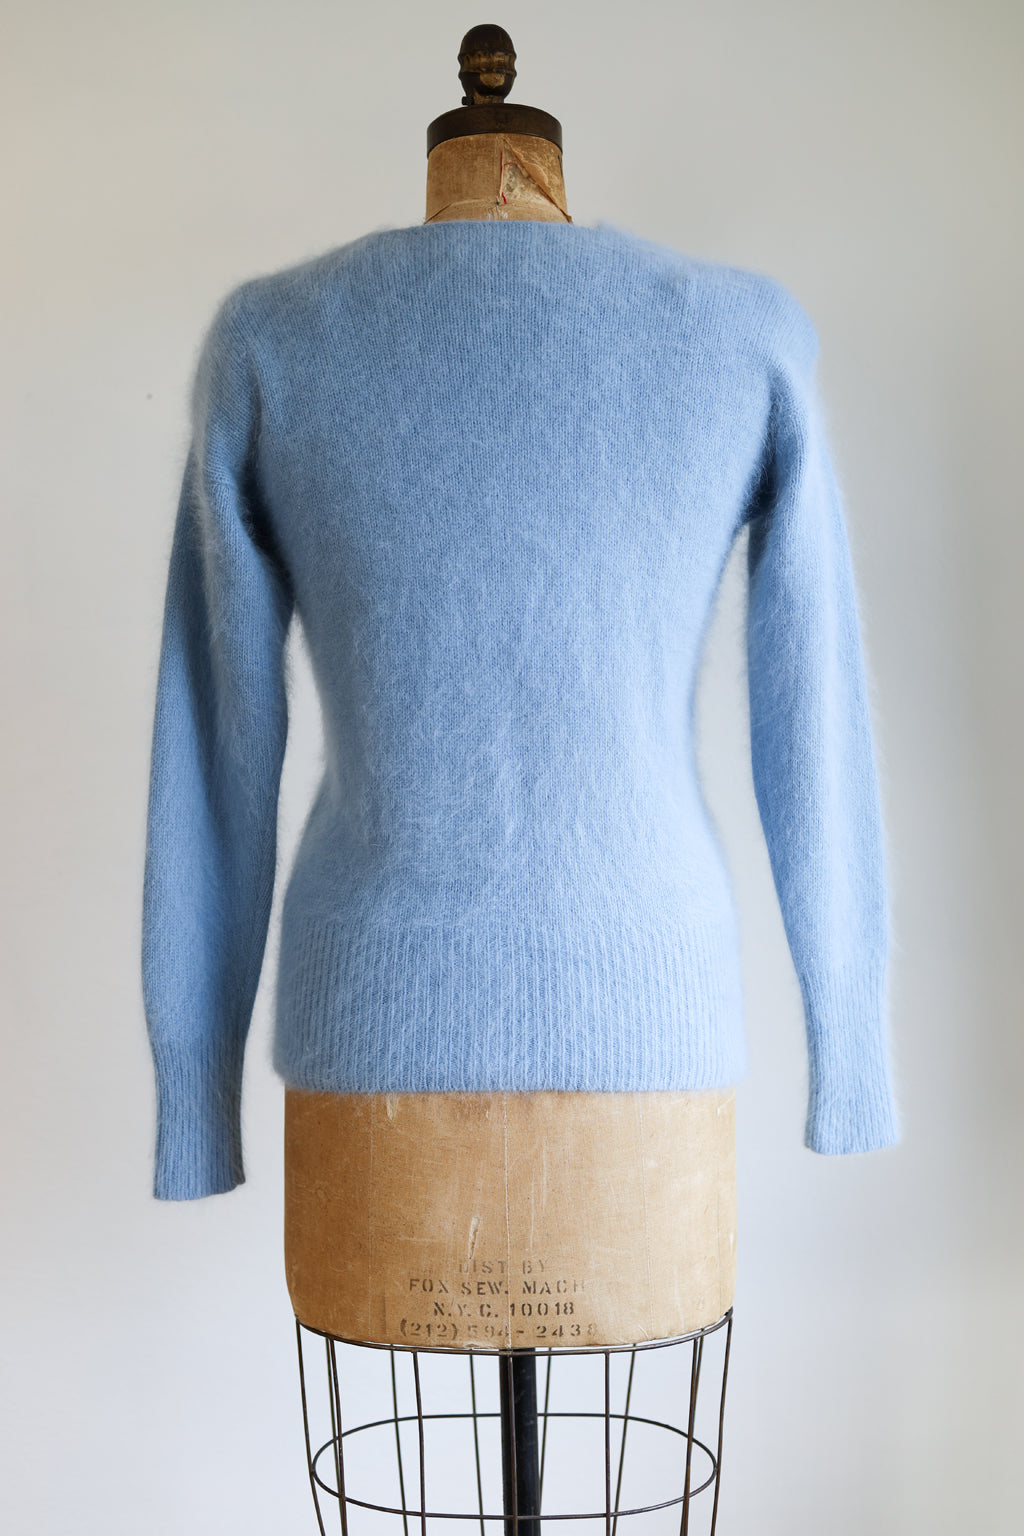 Vintage 1980s Angora Pin-Up Sweater - Sexy Baby Blue Pastel Fluff Bomb w Plunge Neck Size M - L